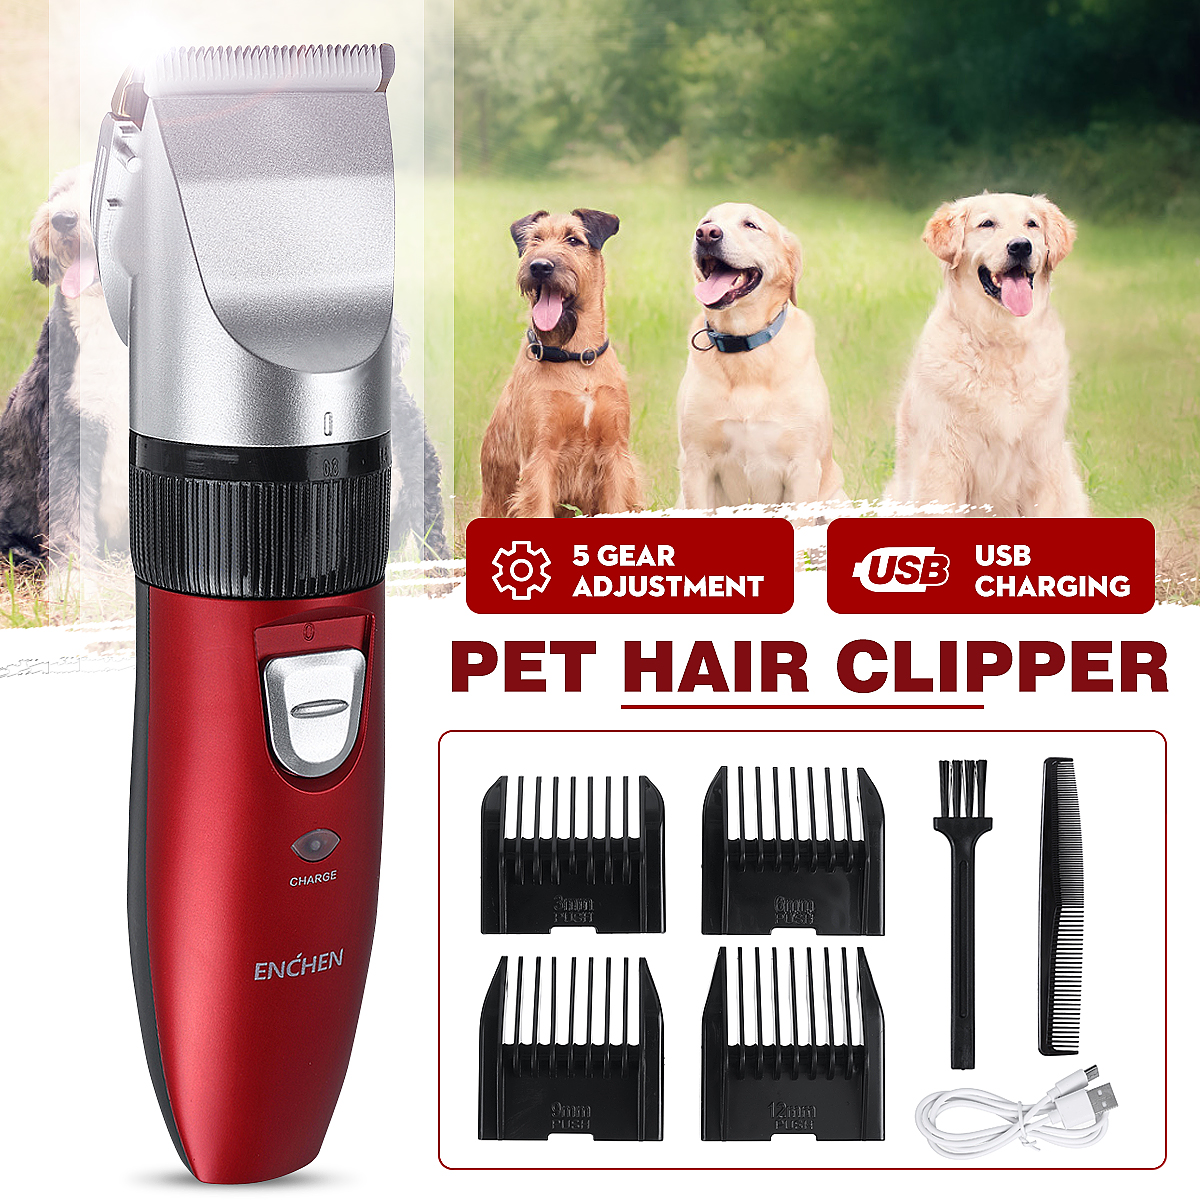 5-Gears-Cordless-Electric-Pet-Hair-Clipper-USB-Rechargeable-Dog-Puppy-Grooming-Trimmer-w-4-Limit-Com-1756860-1